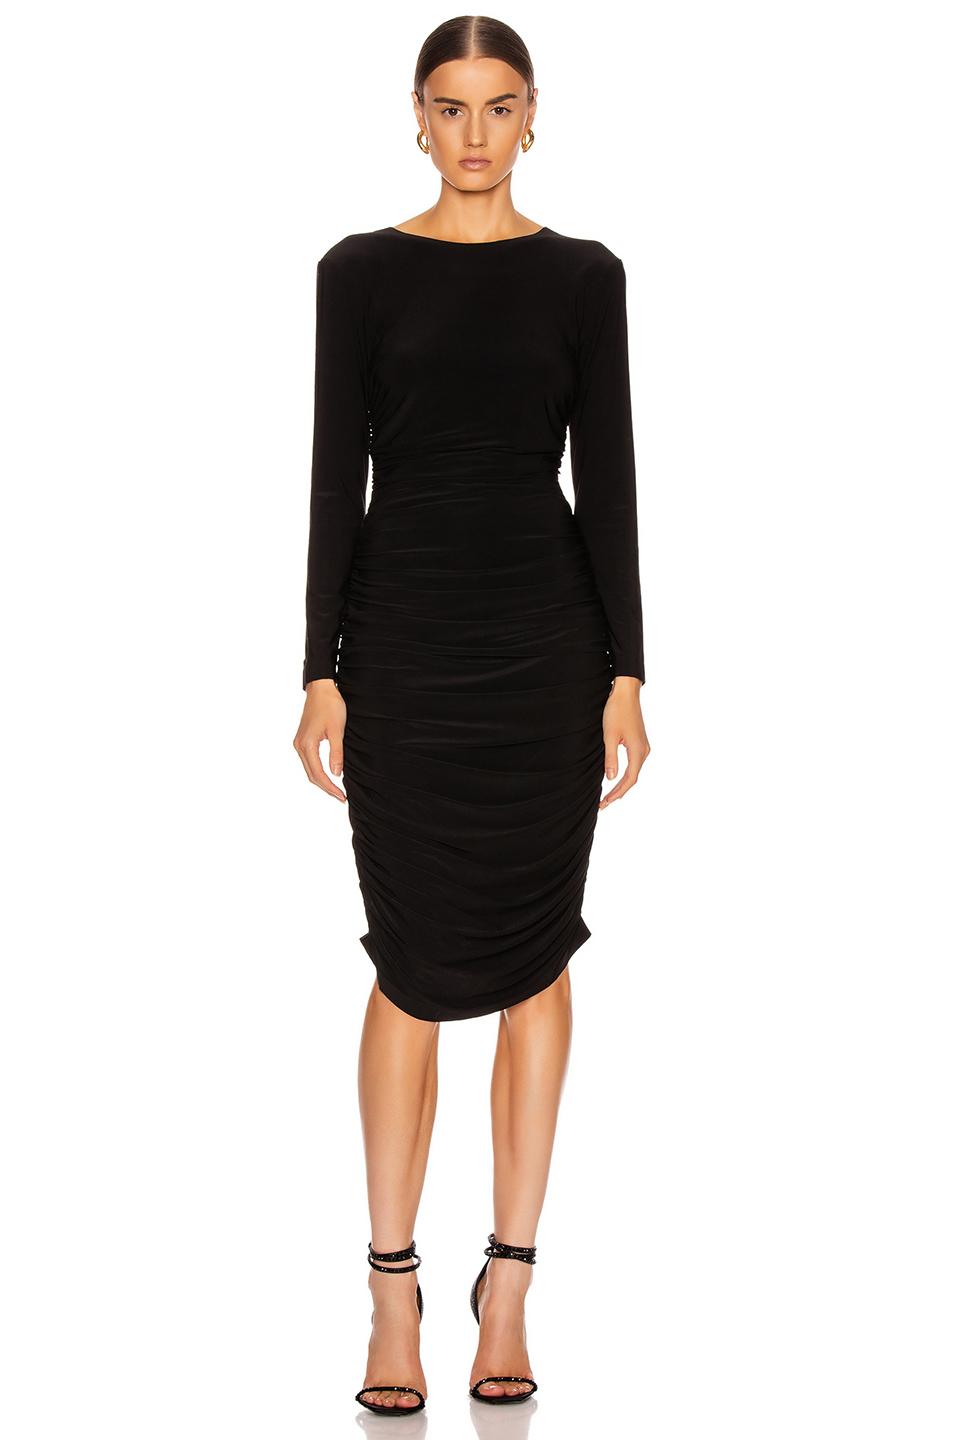 Norma Kamali Synthetic Long Sleeve Shirred Dress in Black - Lyst